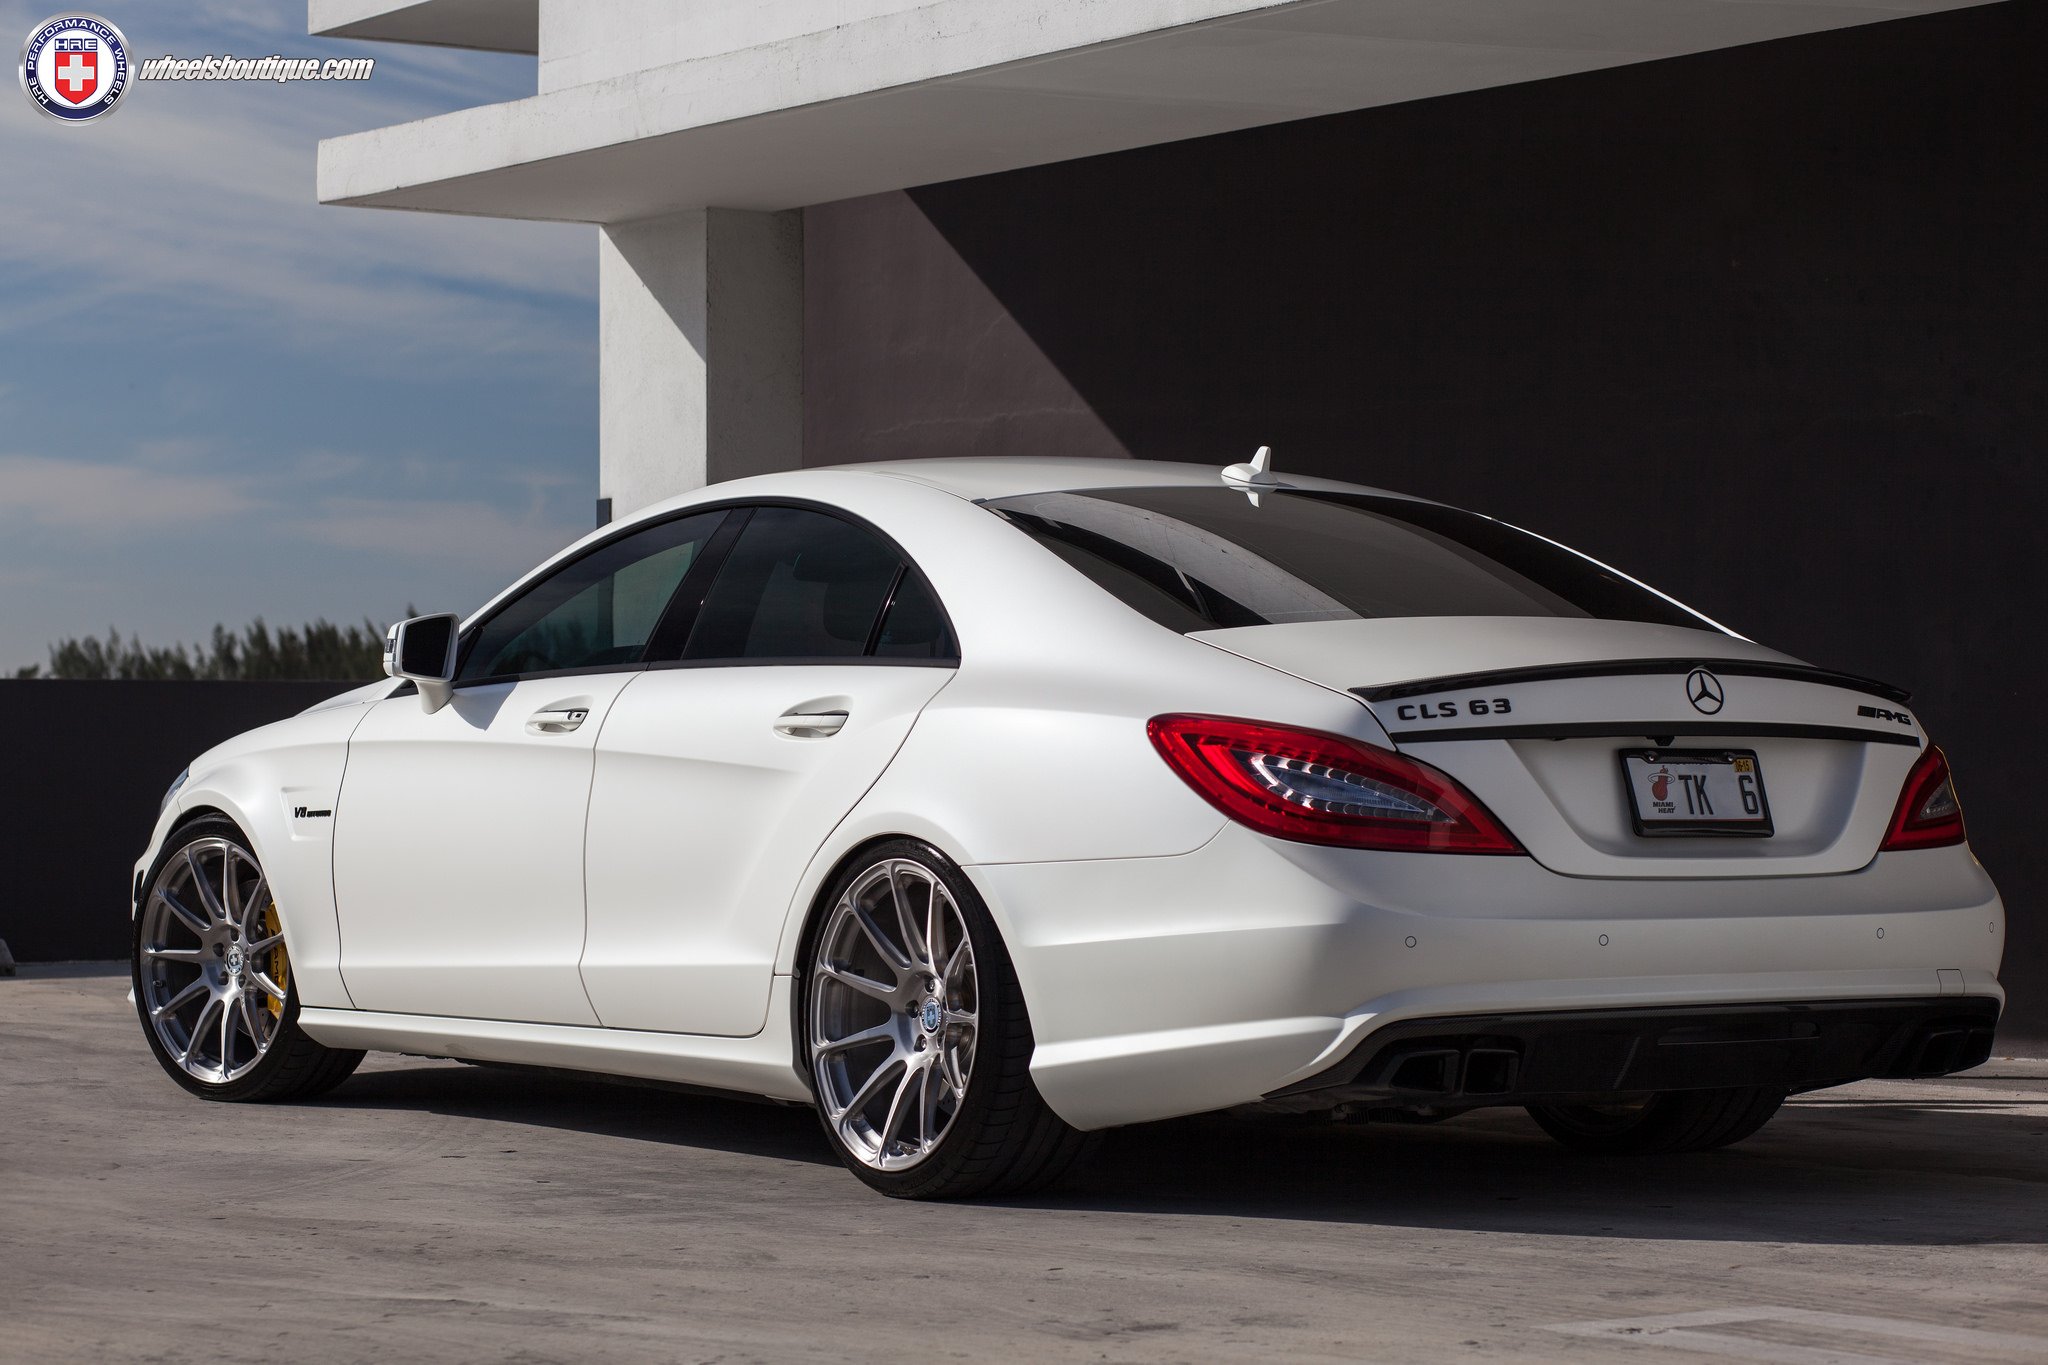 2015, Cars, Hre, Mercedes, Cls63, Tuning, Wheels Wallpaper